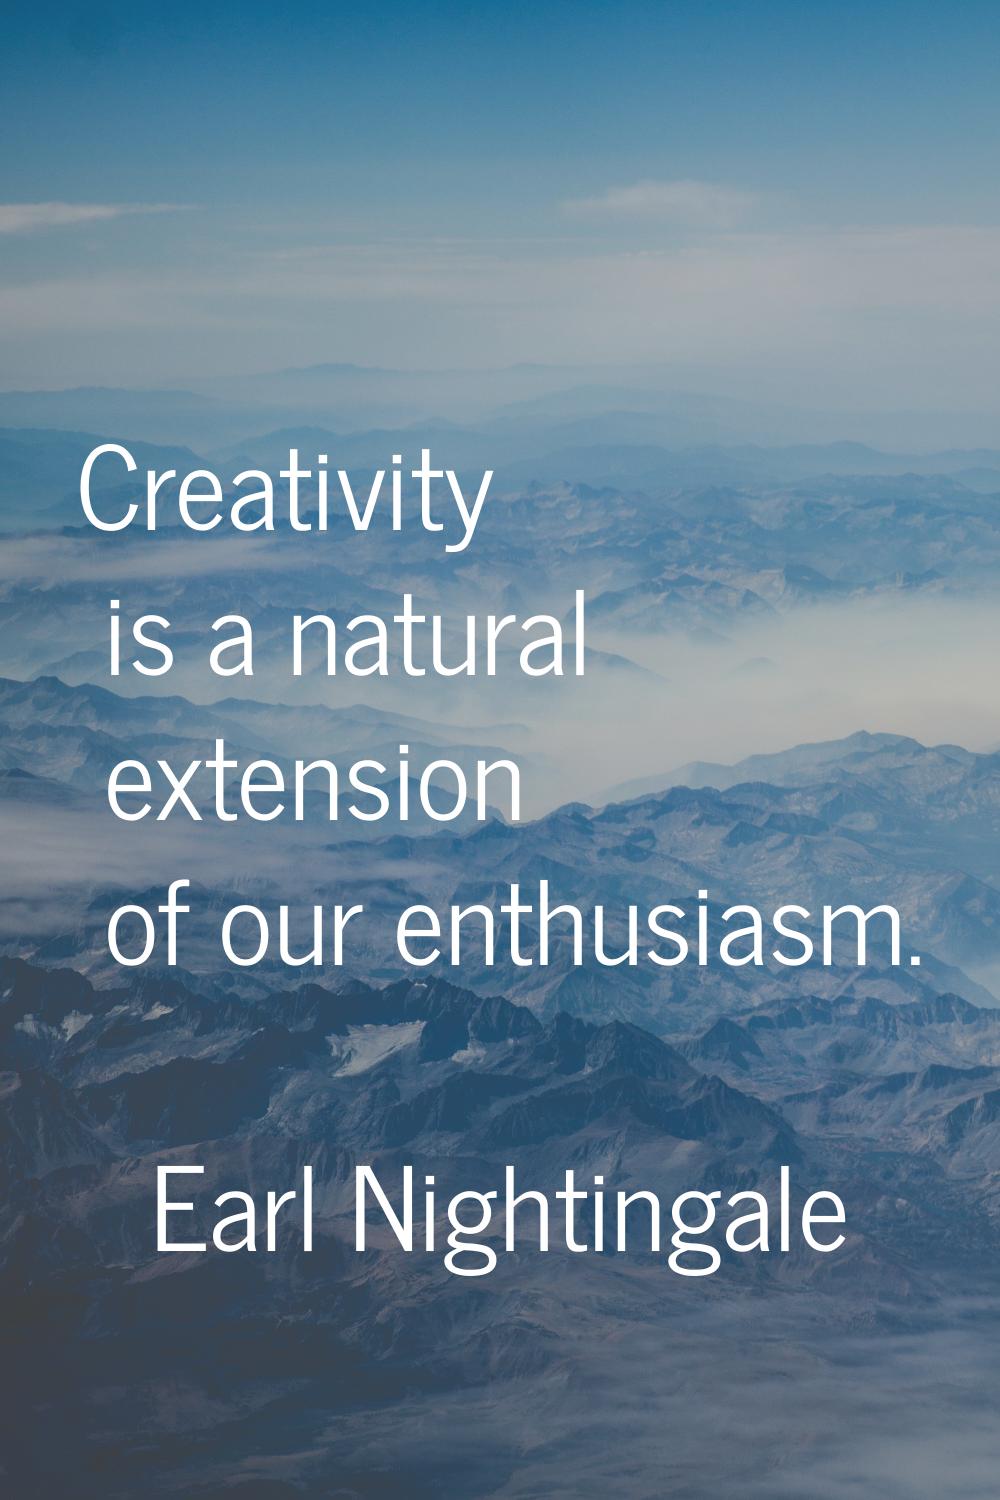 Creativity is a natural extension of our enthusiasm.